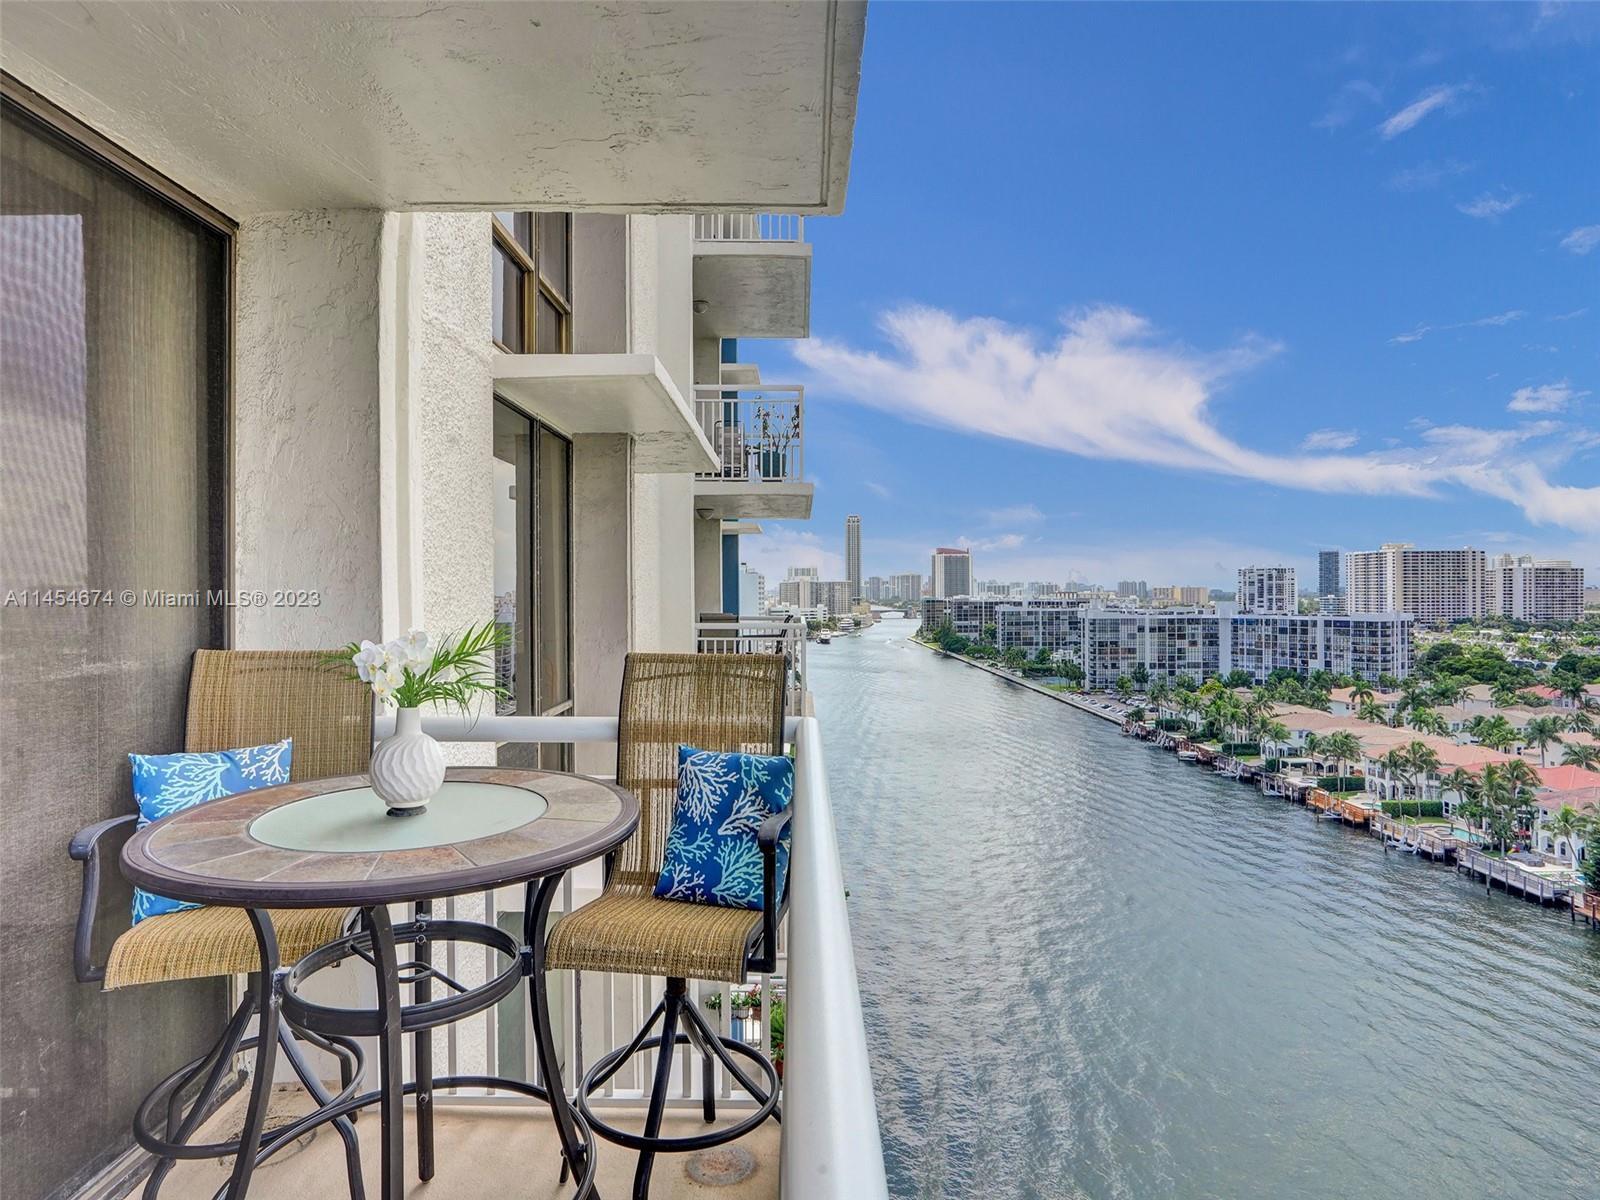 This stunning residence offers breathtaking Intracoastal views, capturing daily sunsets and a yacht-